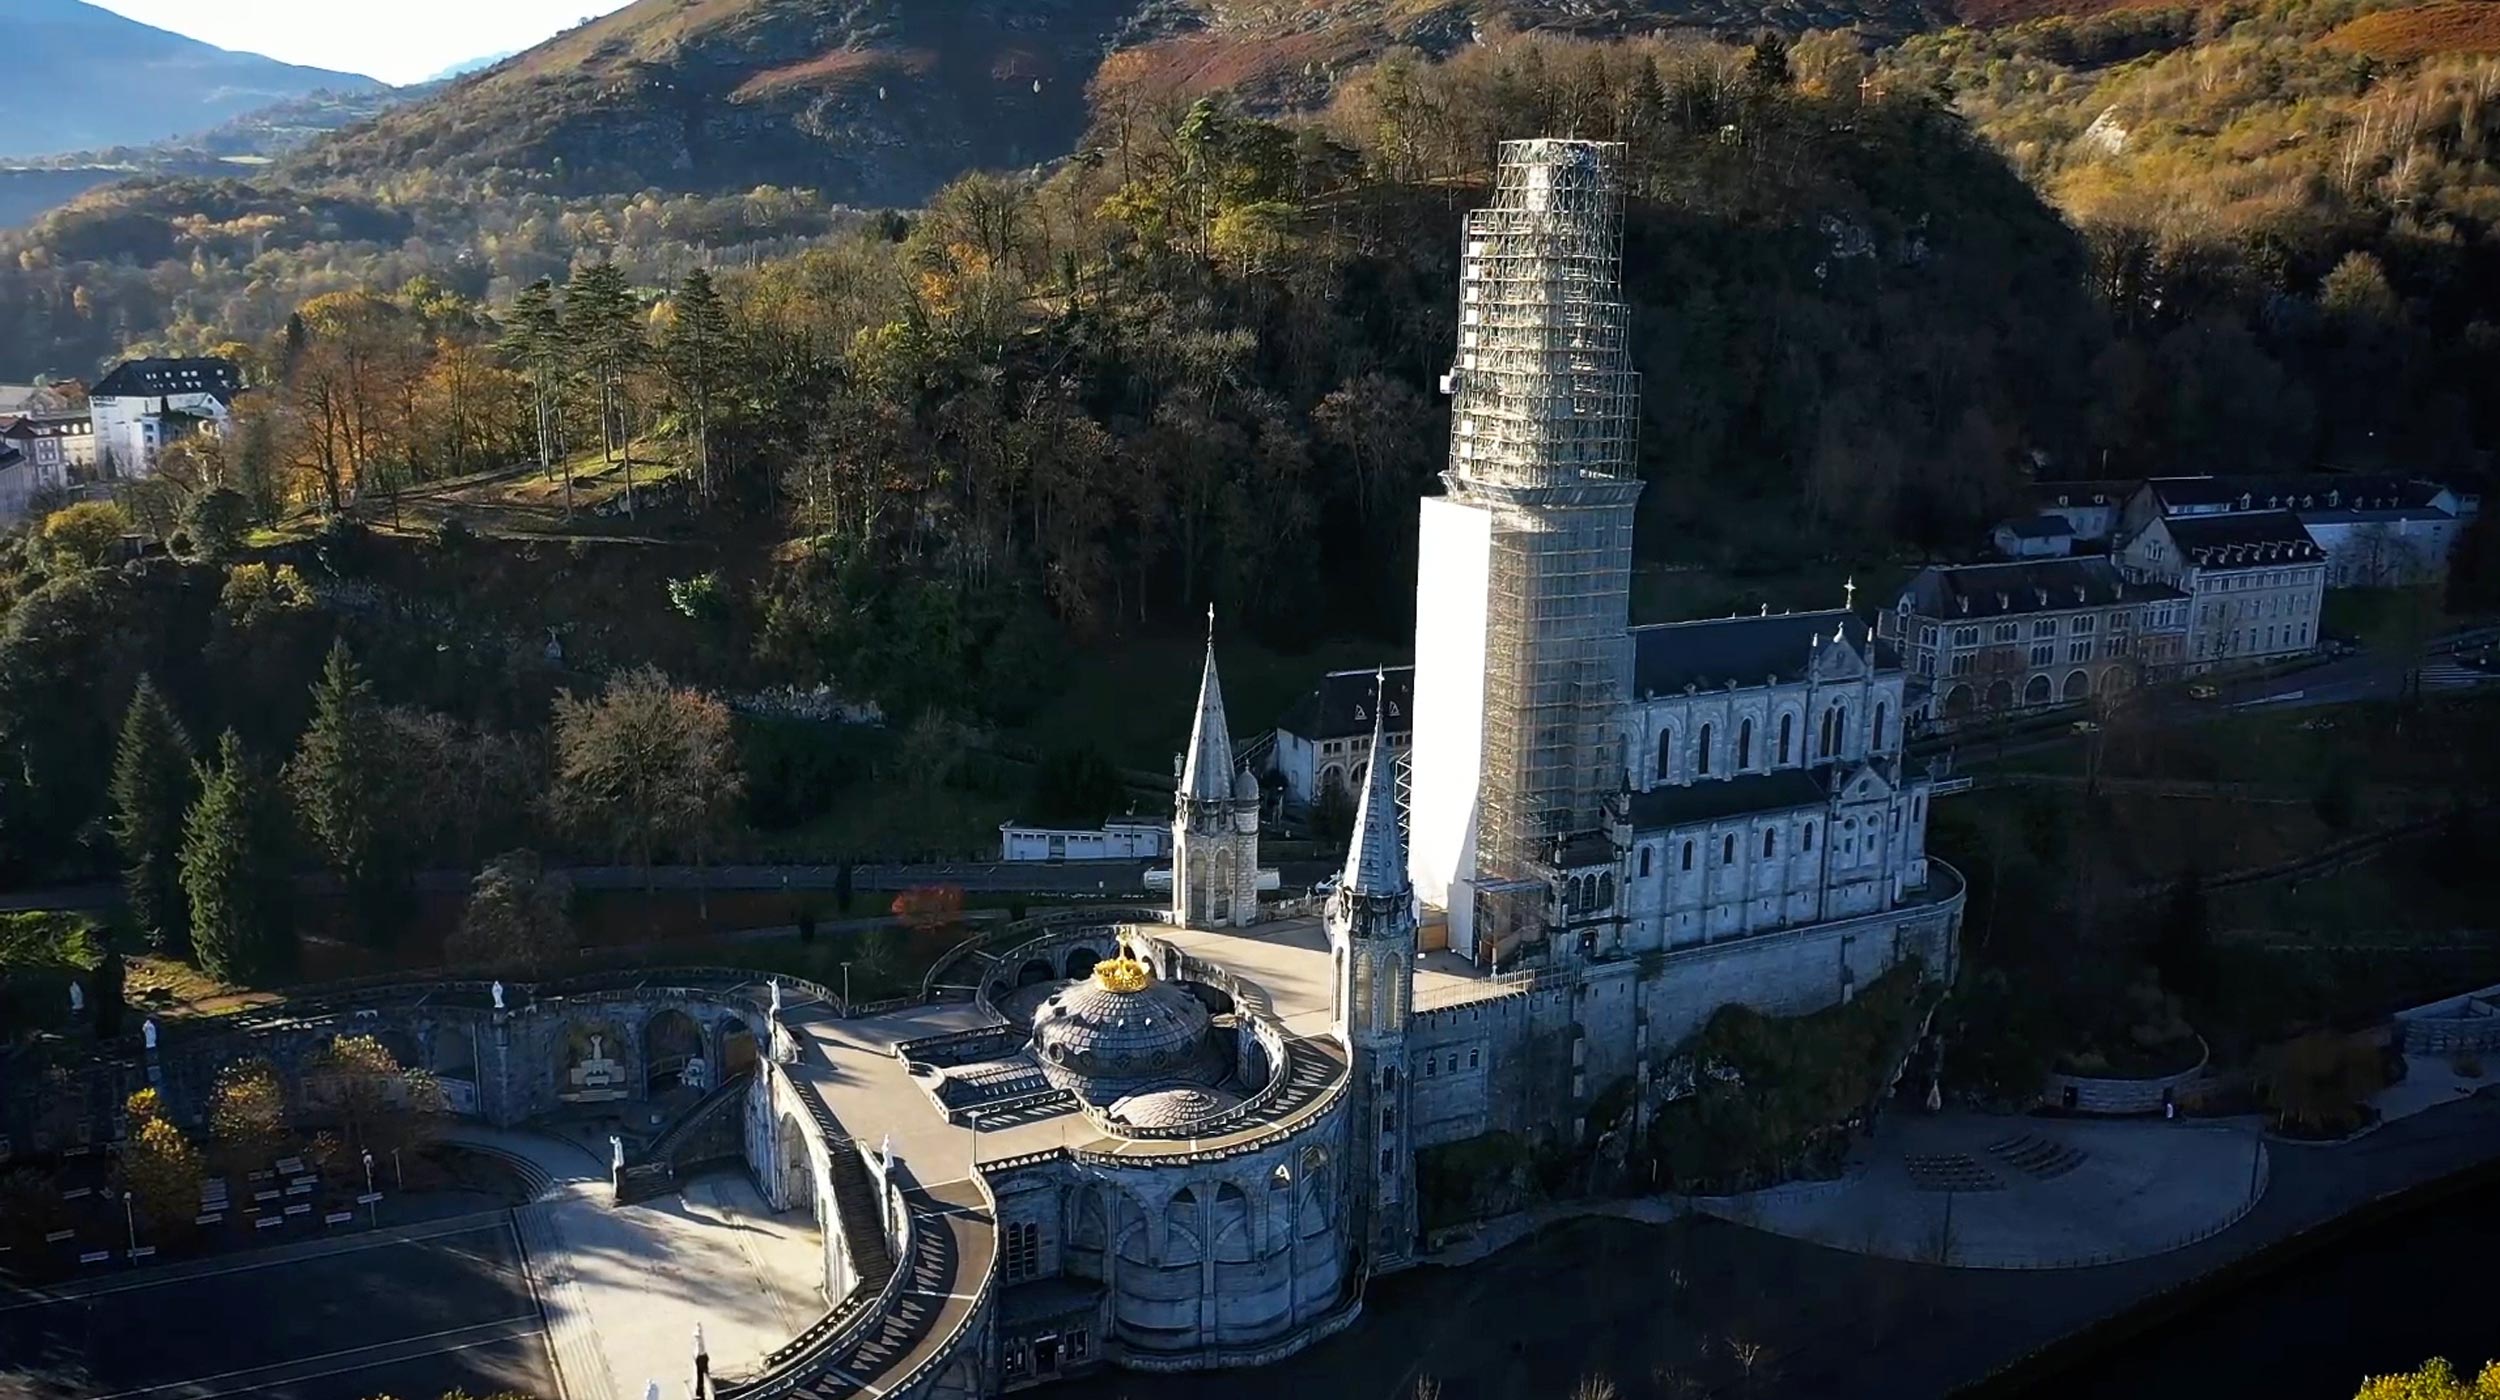 Restoration work on the bell tower of the Basilica of the Immaculate Conception, known as the Sanctuary of Our Lady of Lourdes, France.